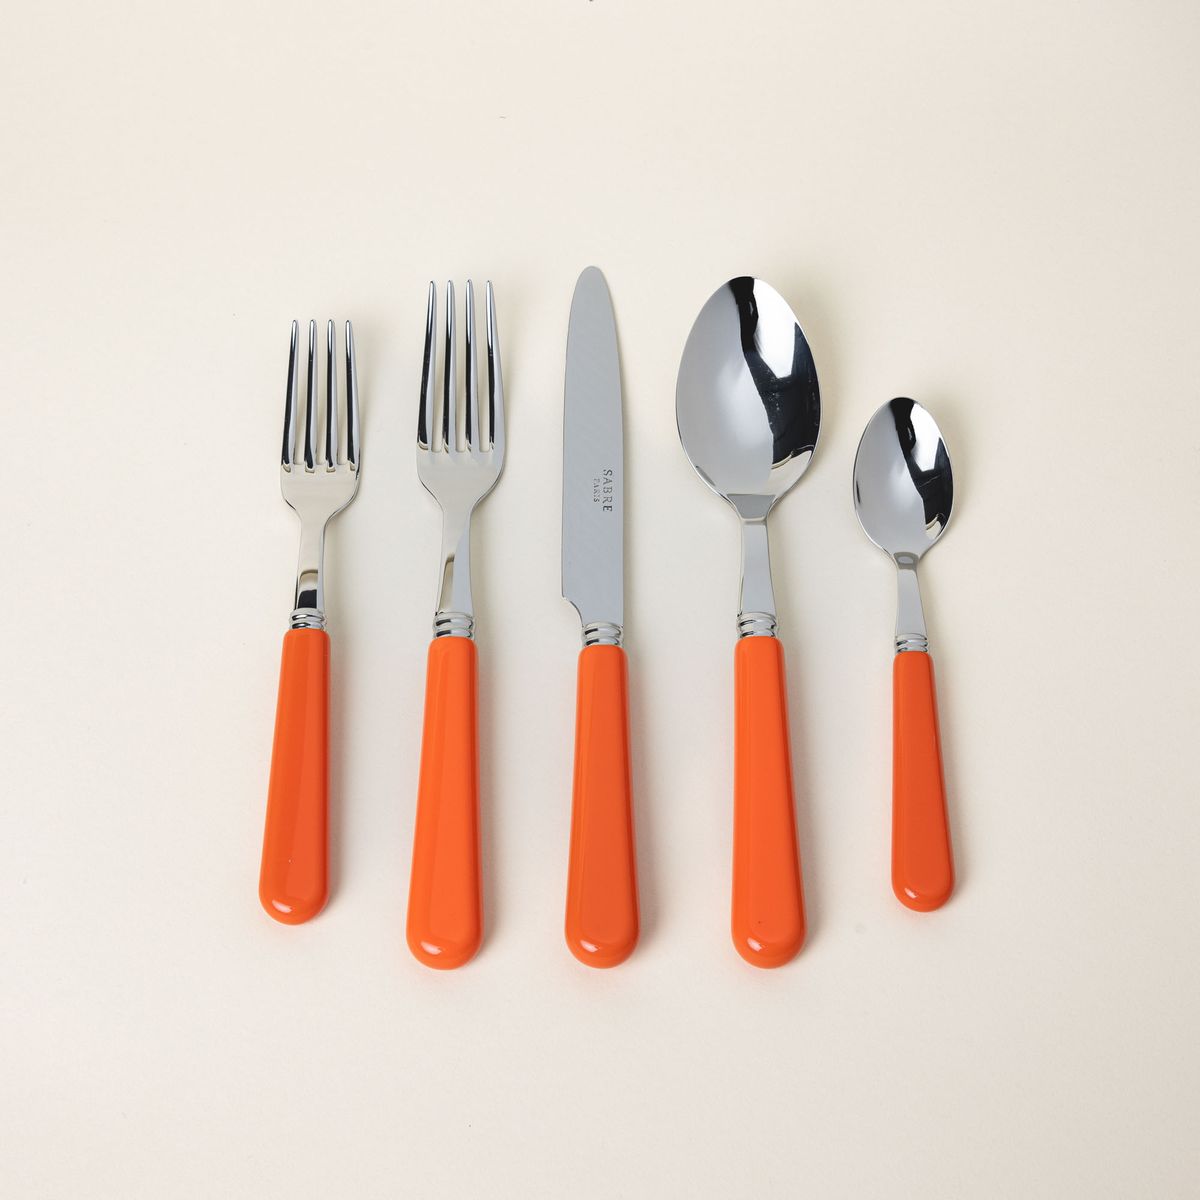 A five piece flatware set with shiny utensils and matte bold orange handles